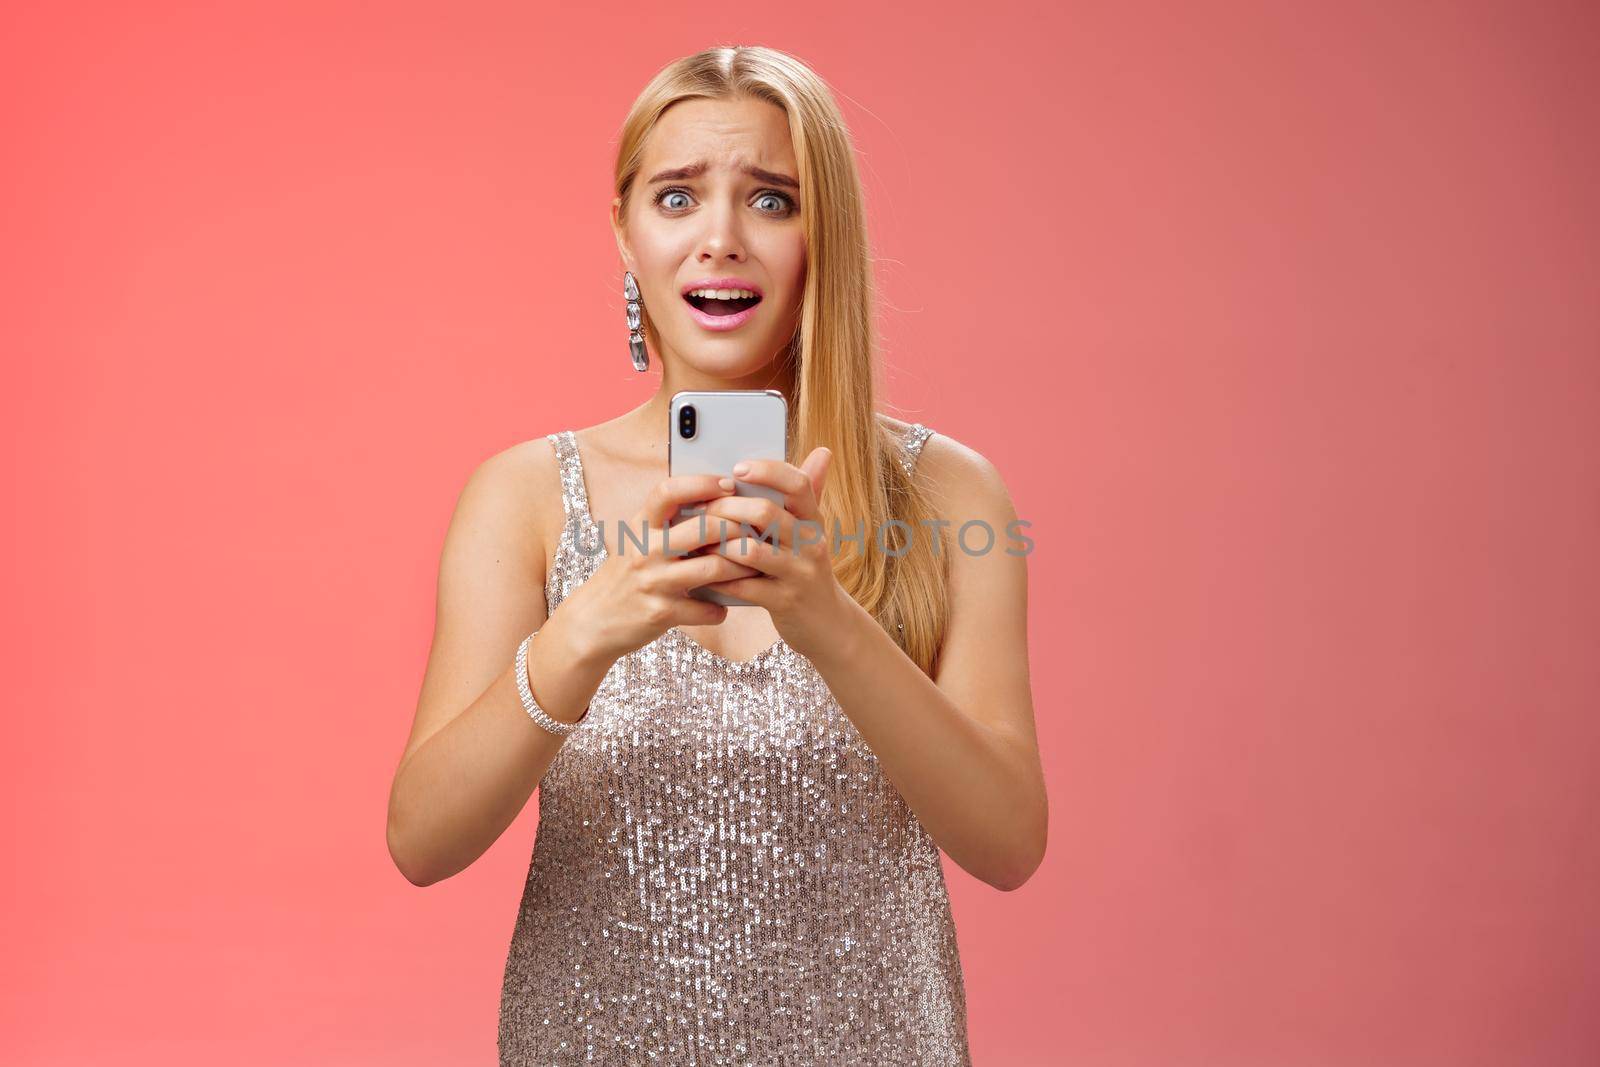 Panicking shocked woman concerned photos leaked internet look afraid anxious widen eyes cringing troubled hold smartphone shook speechless gasping terrified friends find out secret, red background.